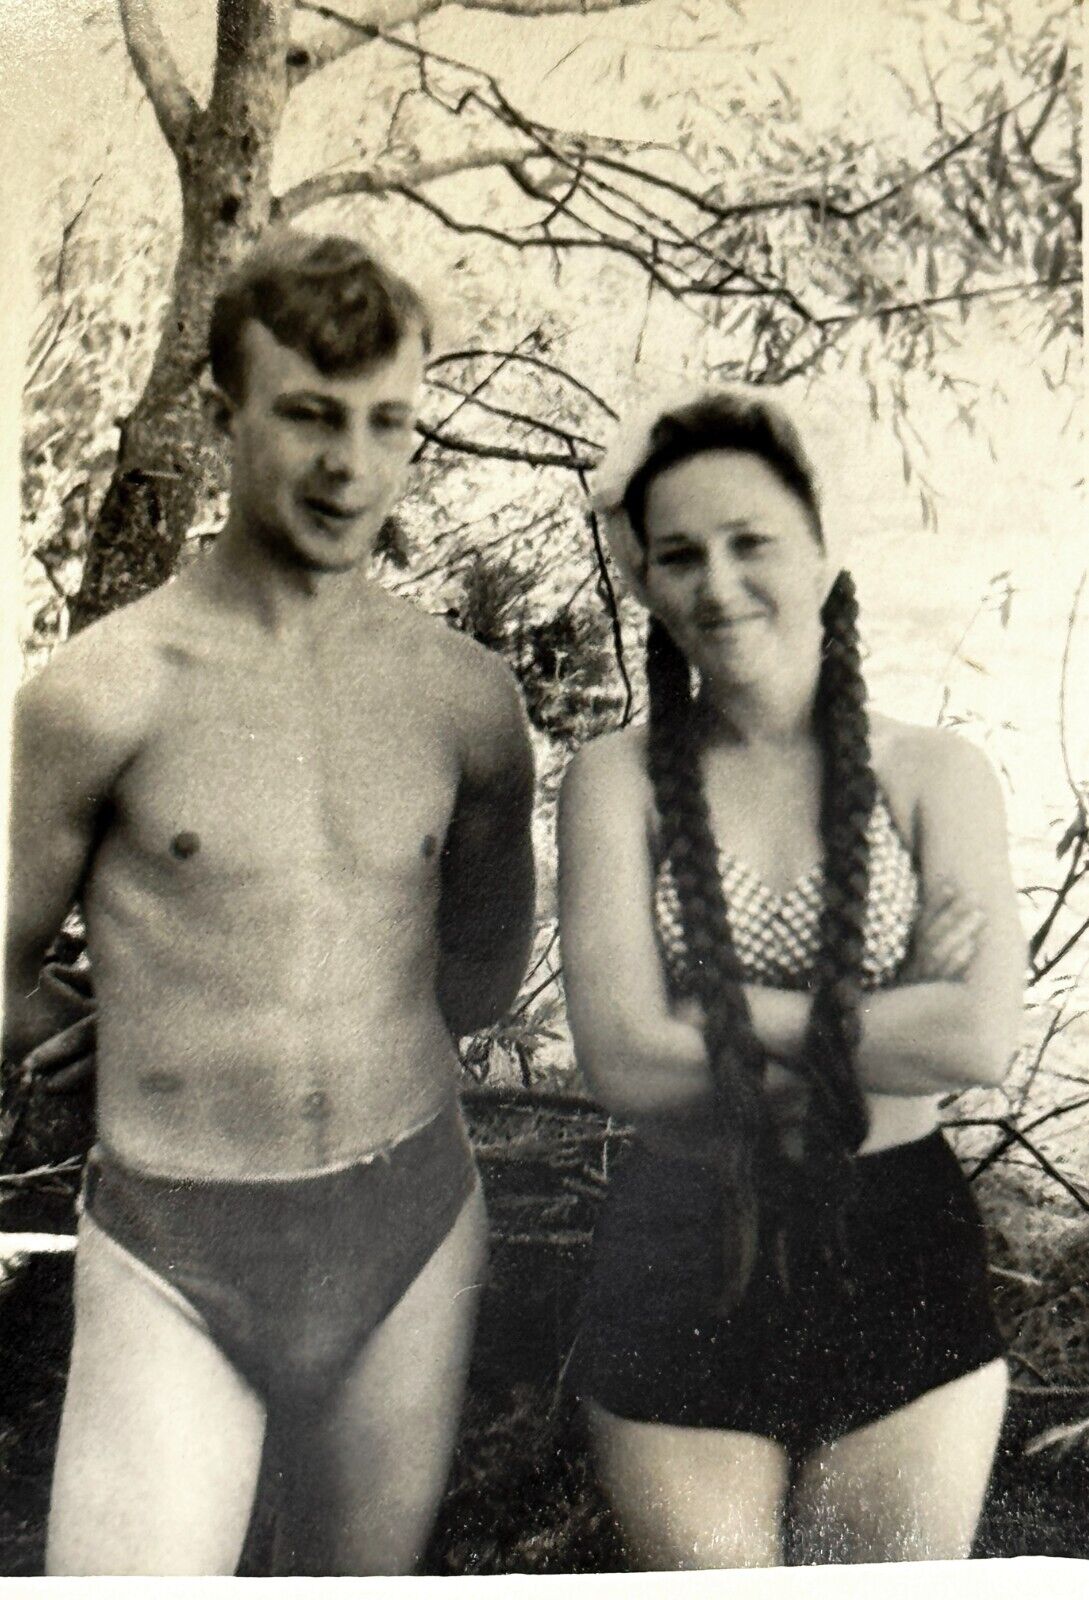 1960s Handsome Shirtless Man Trunks Bulge Young Woman Long Braids Vintage Photo